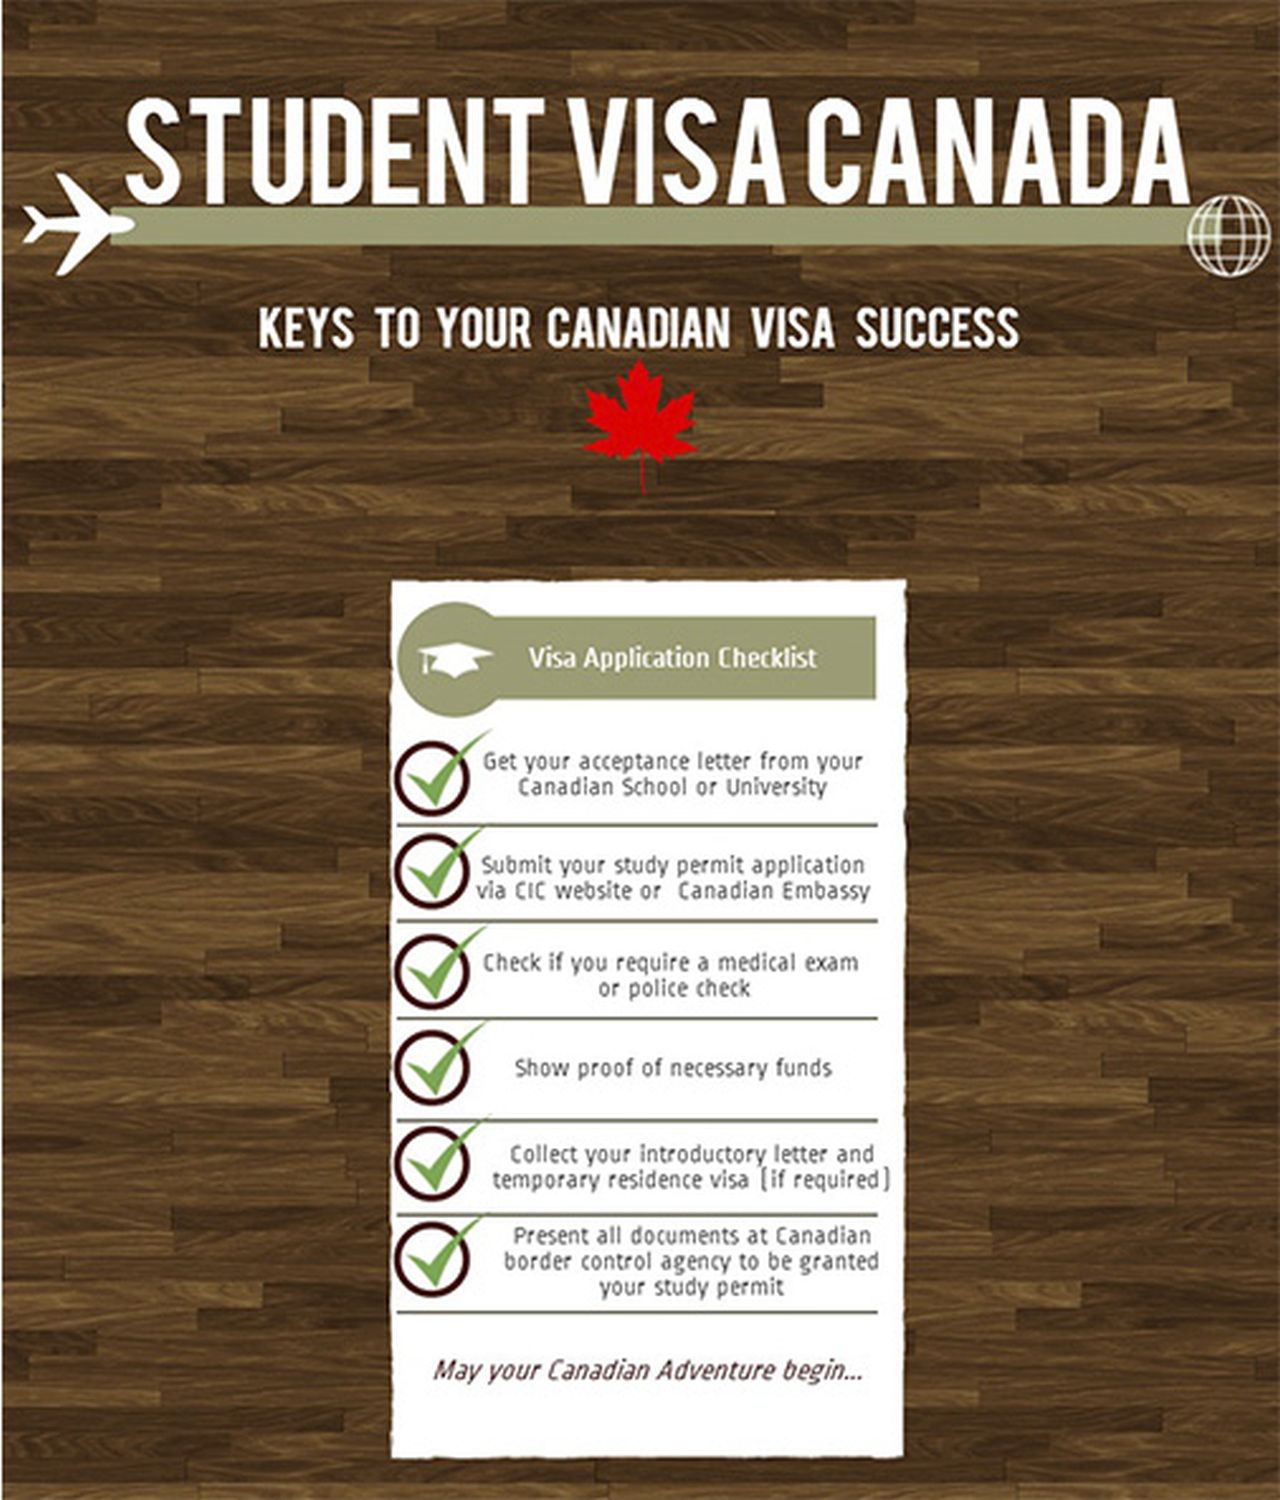 Tips to Apply for Study Visa in Canada and working as Student